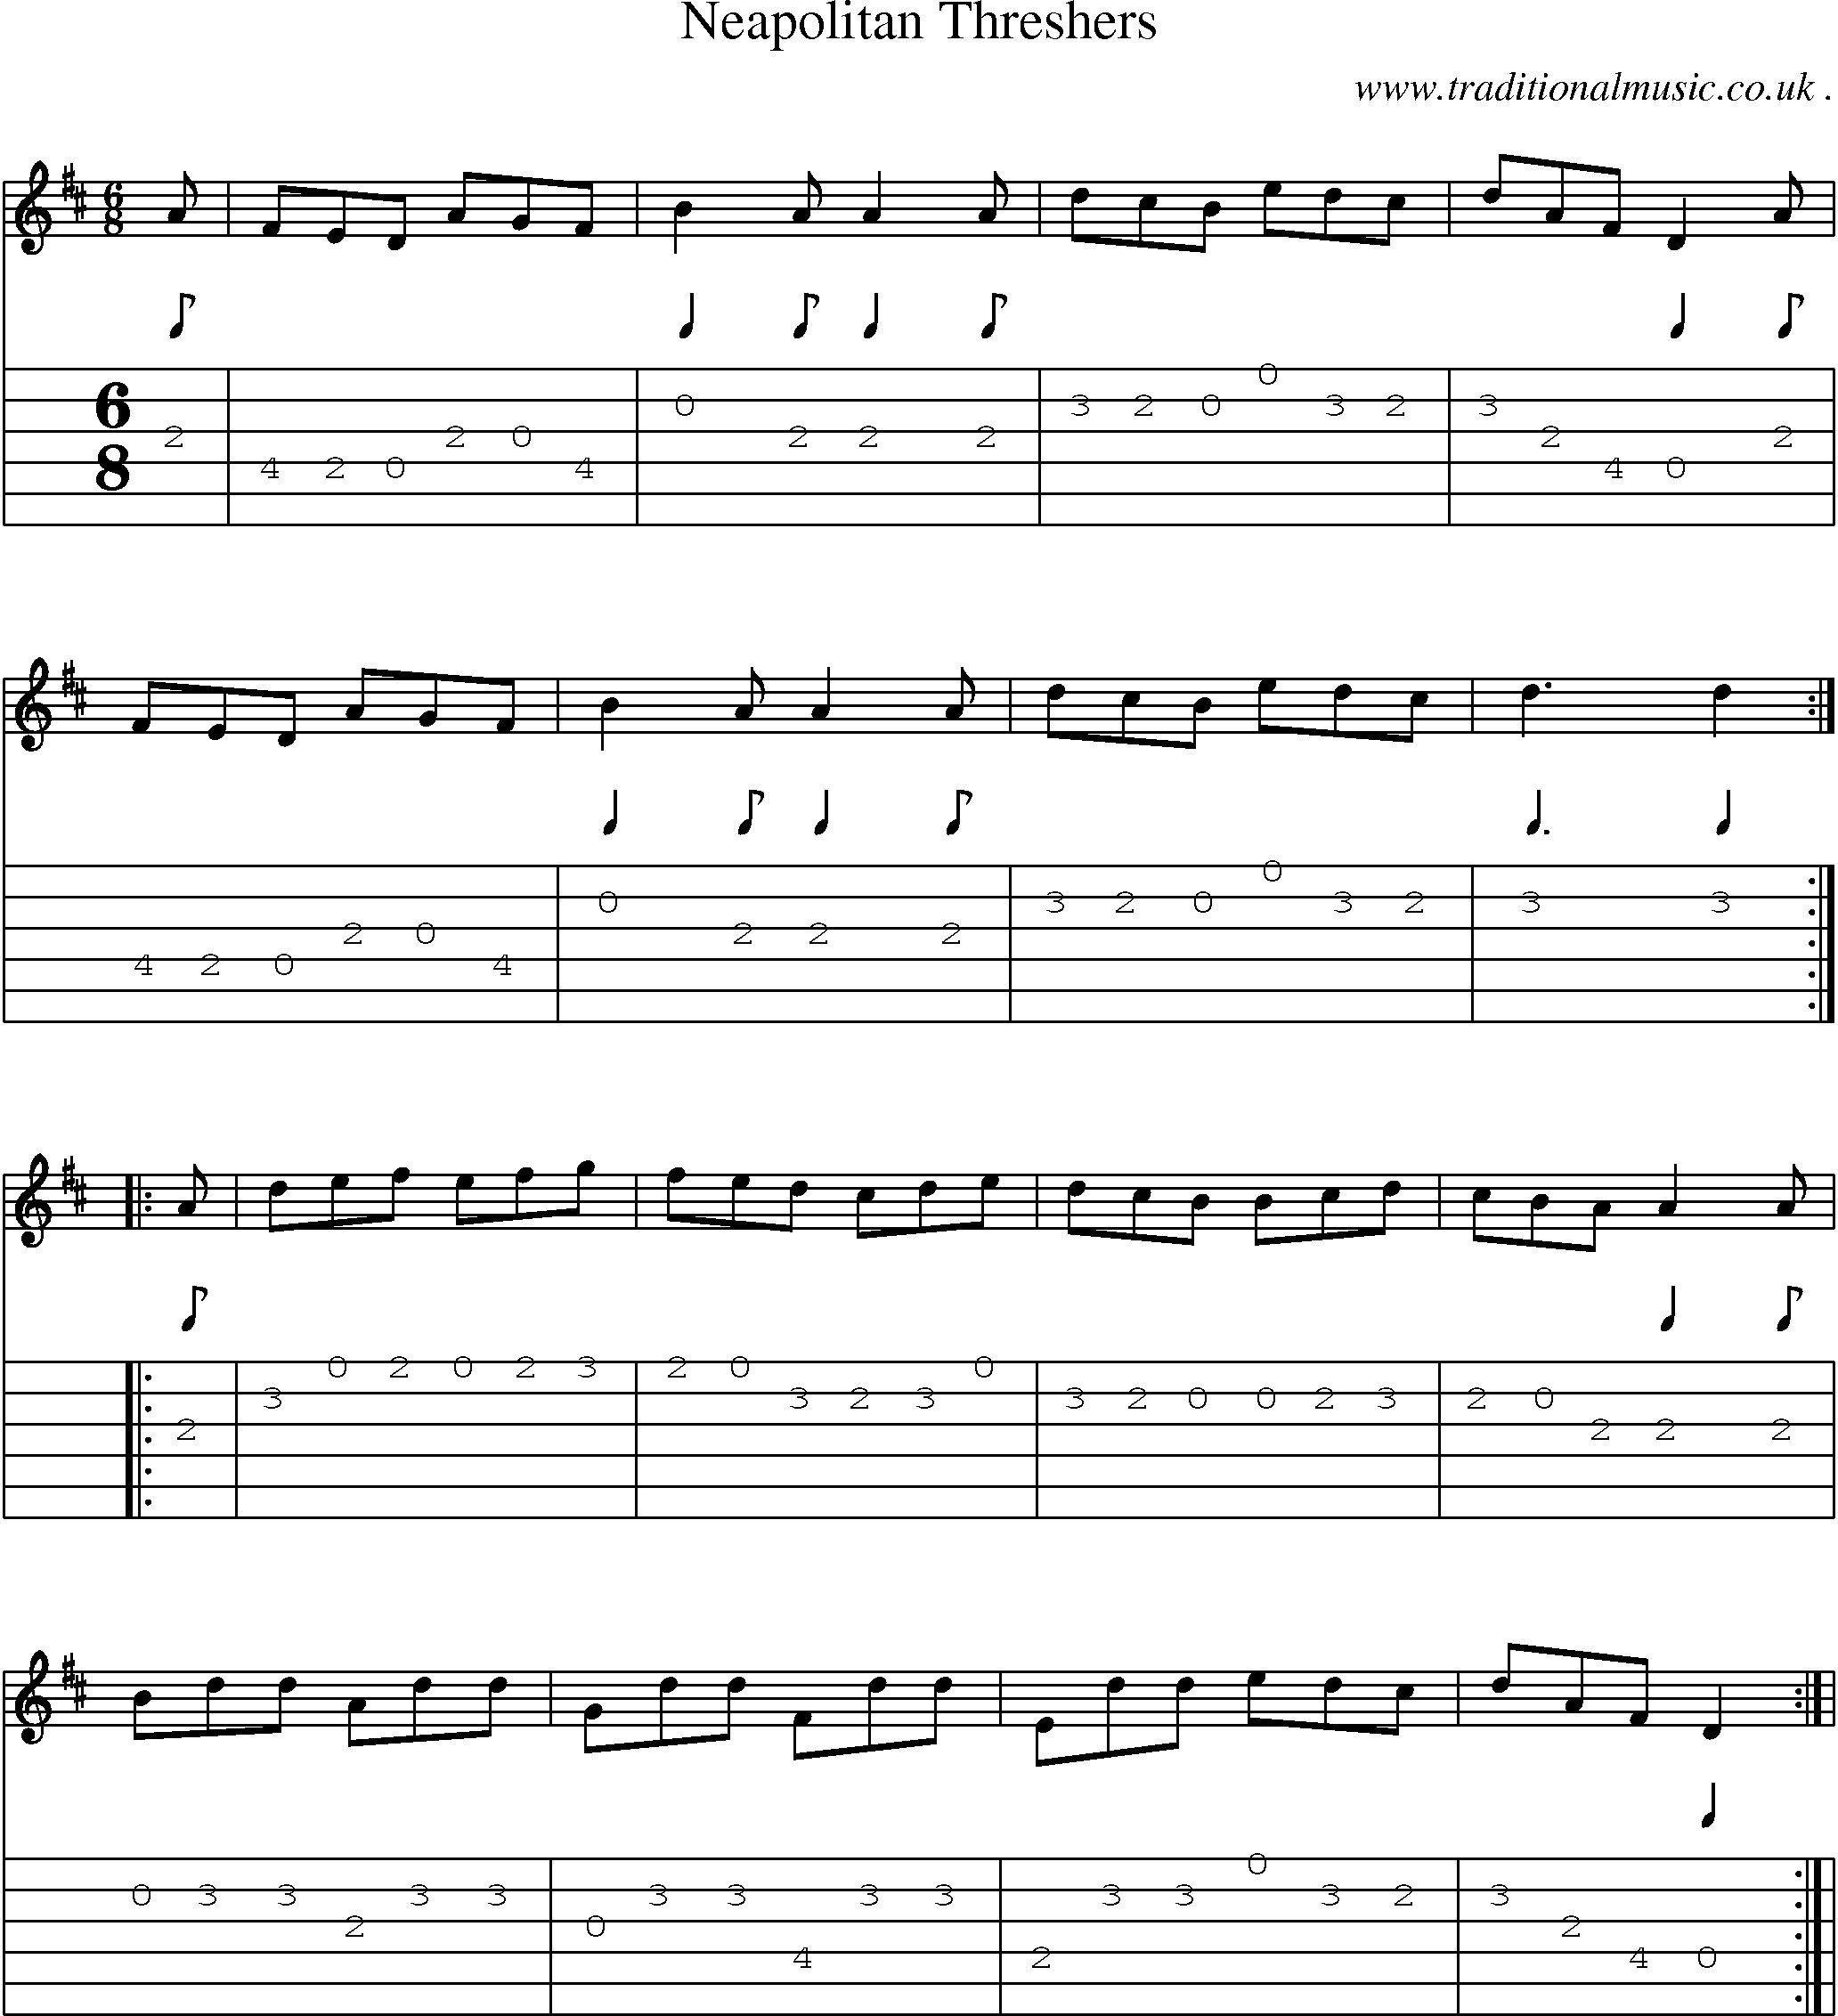 Sheet-Music and Guitar Tabs for Neapolitan Threshers